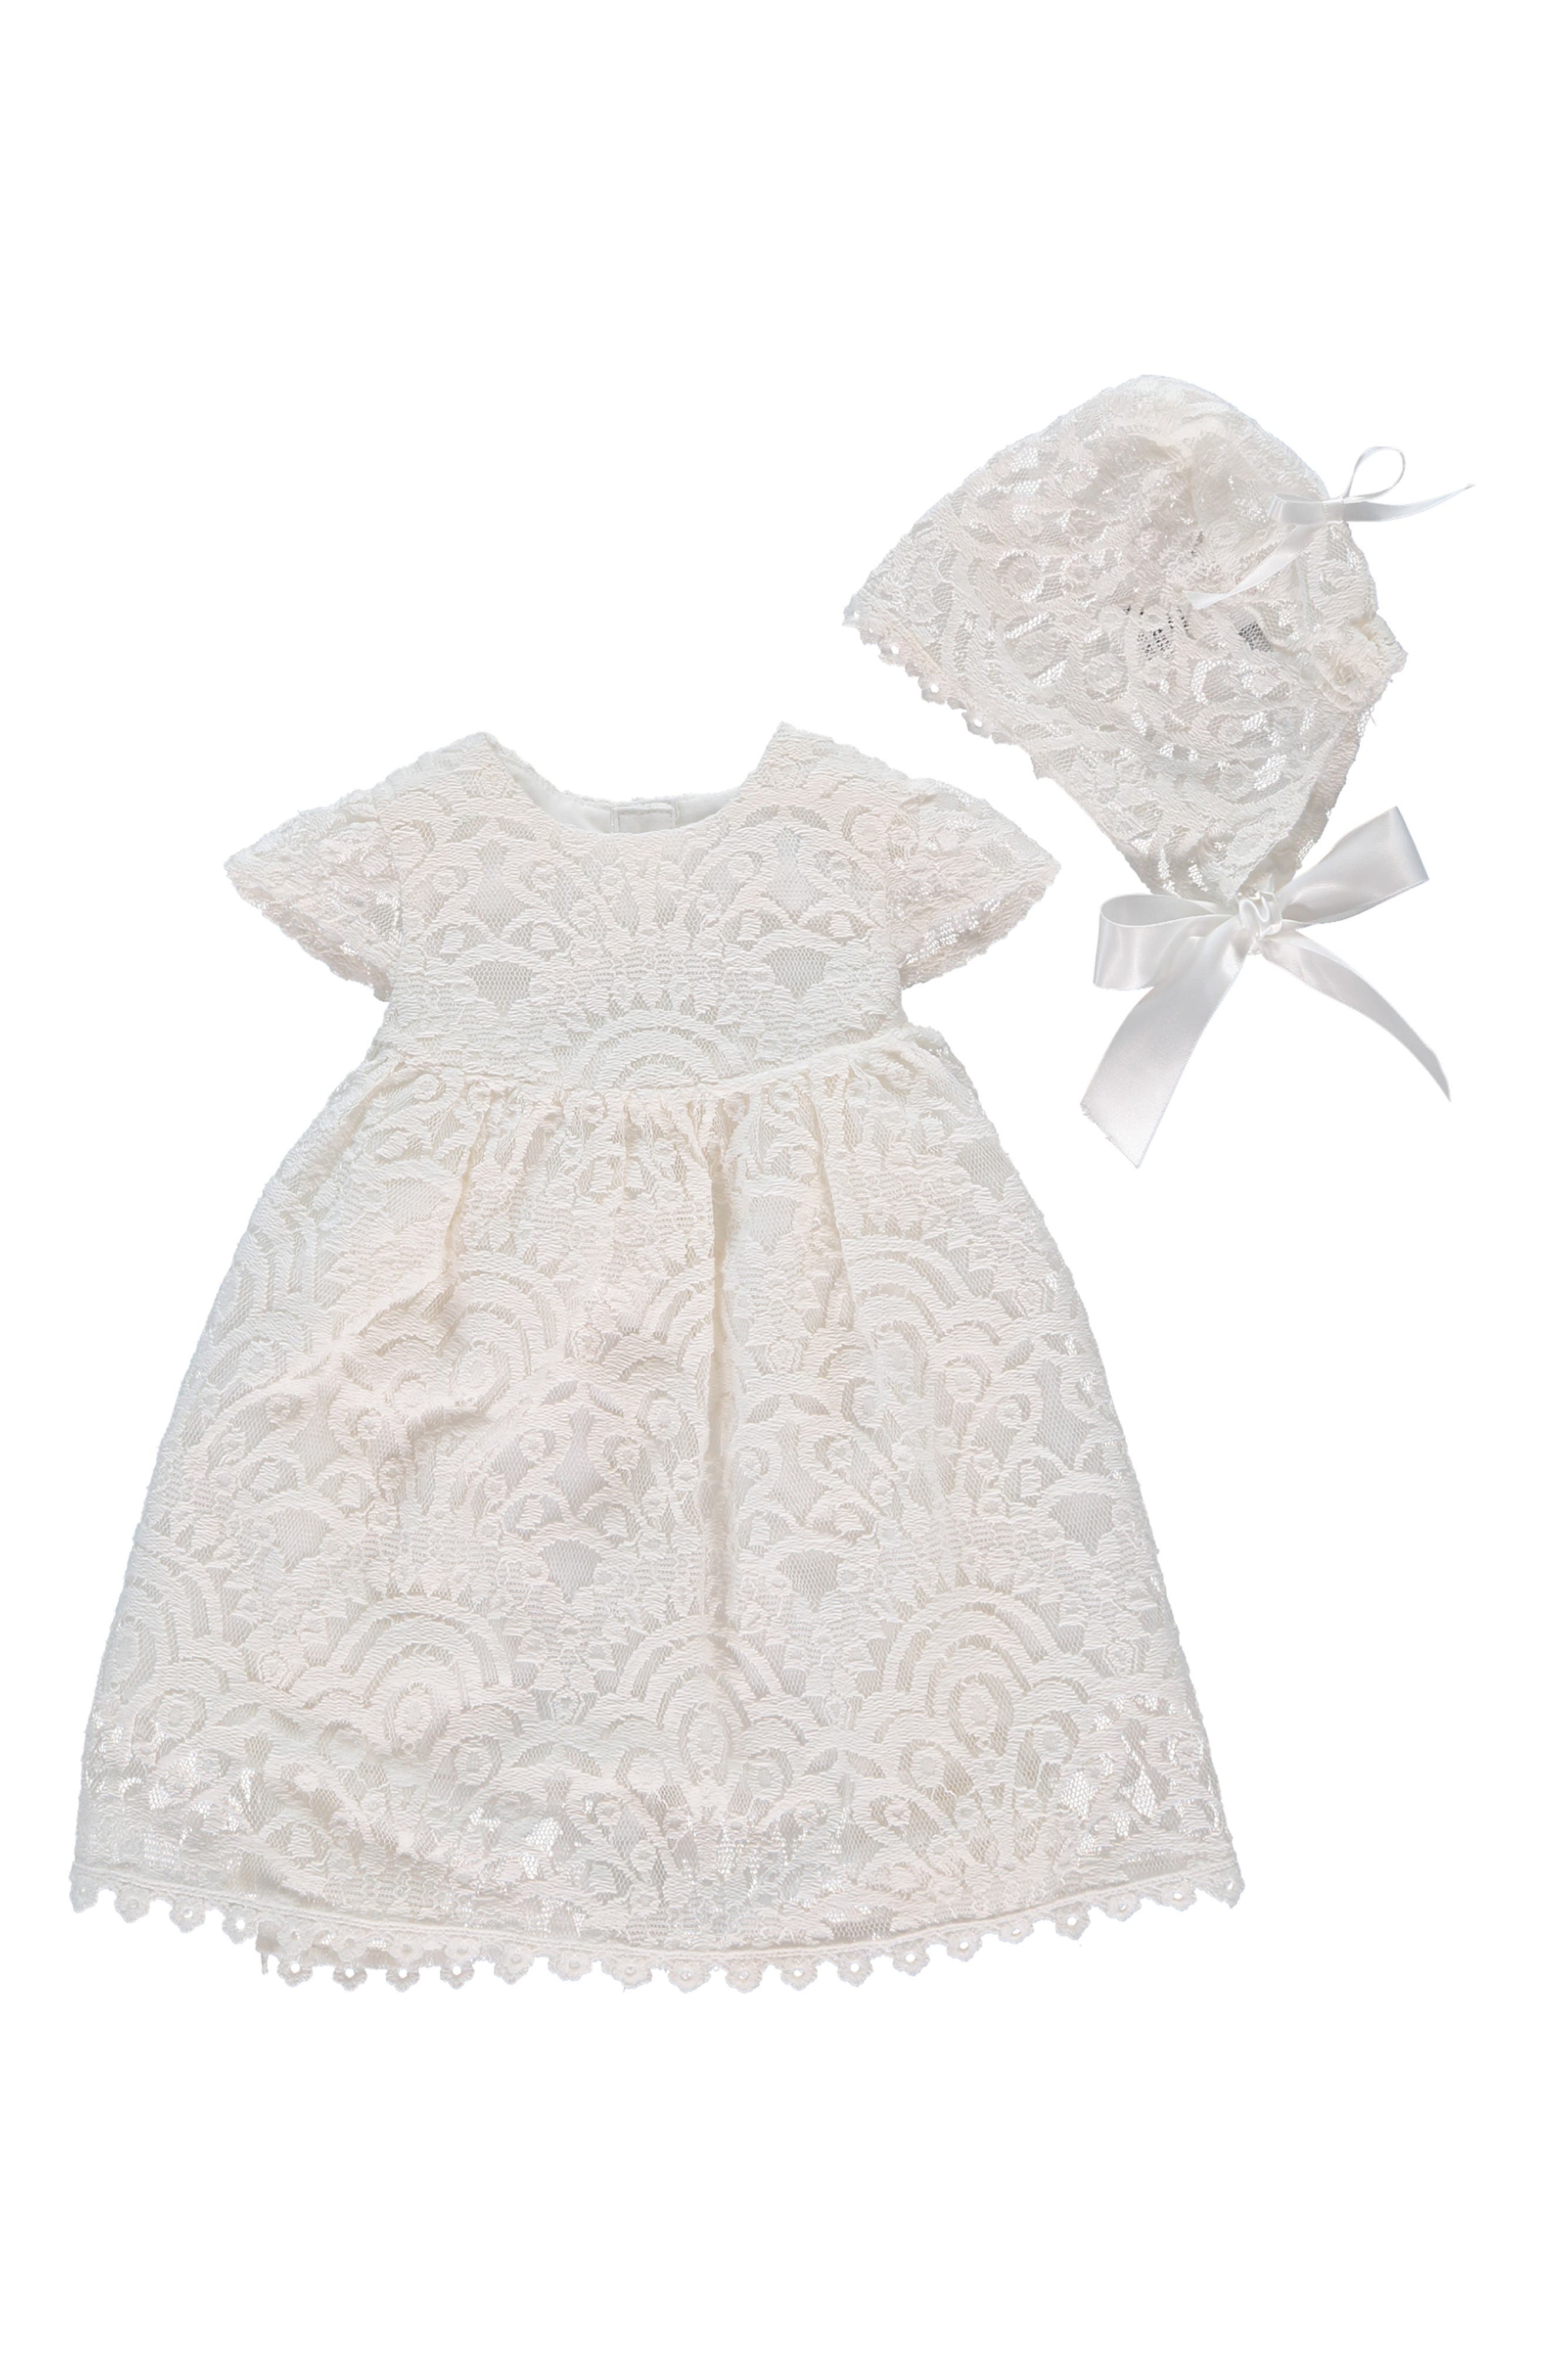 Cinda Baby Girls White Lace Christening Gown and Bonnet